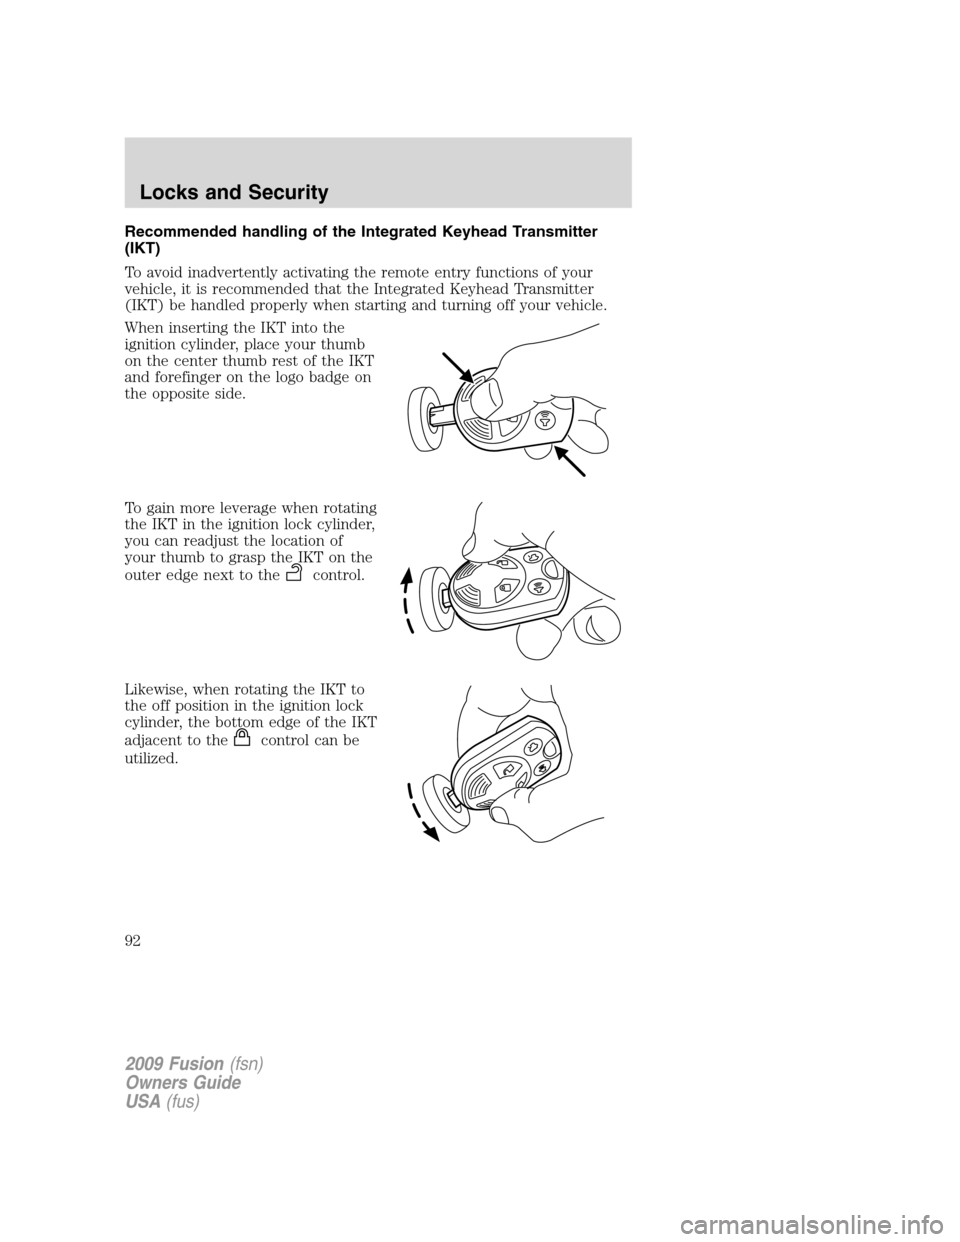 FORD FUSION (AMERICAS) 2009 1.G Owners Manual Recommended handling of the Integrated Keyhead Transmitter
(IKT)
To avoid inadvertently activating the remote entry functions of your
vehicle, it is recommended that the Integrated Keyhead Transmitter